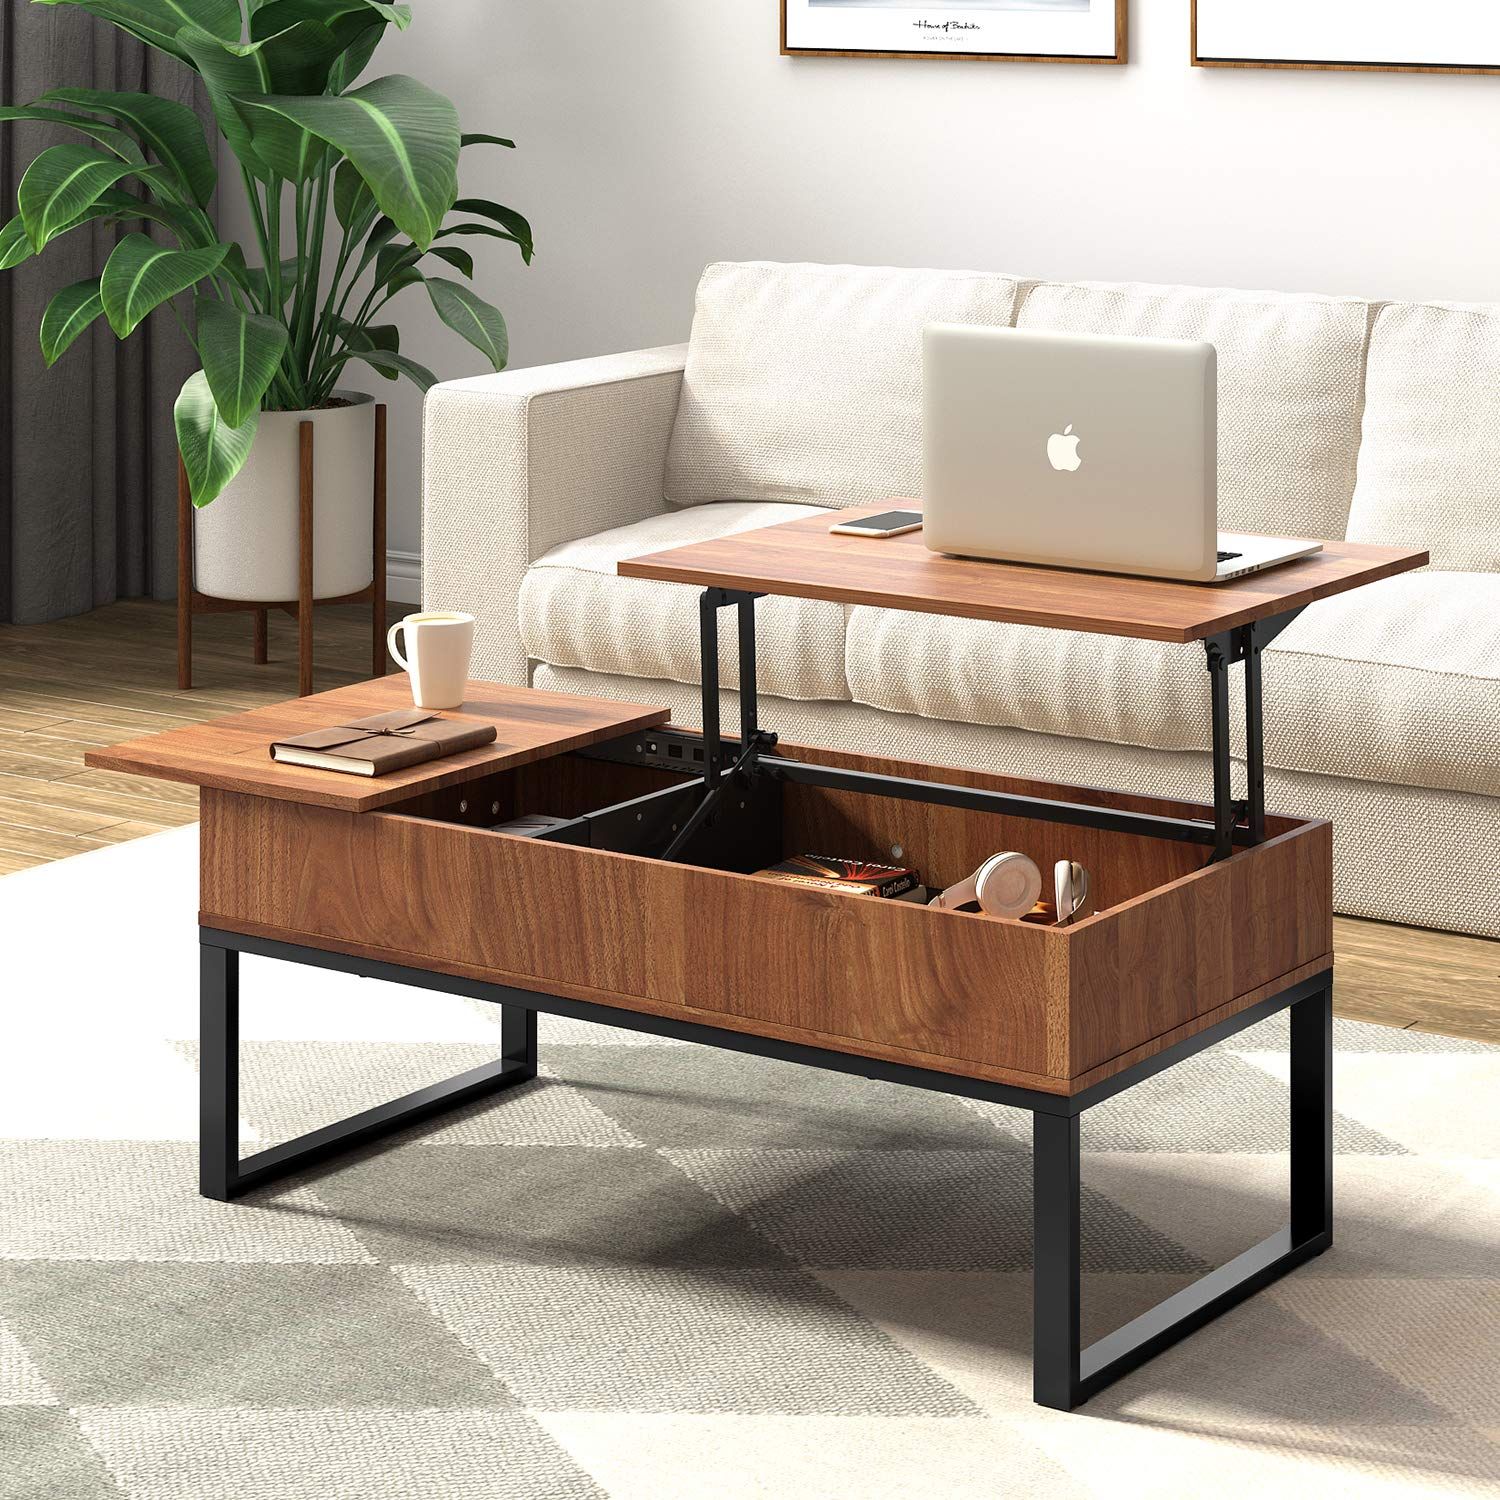 Wlive Wood Coffee Table With Adjustable Lift Top Table, Metal Frame With Regard To Modern Wooden Lift Top Tables (Gallery 2 of 20)